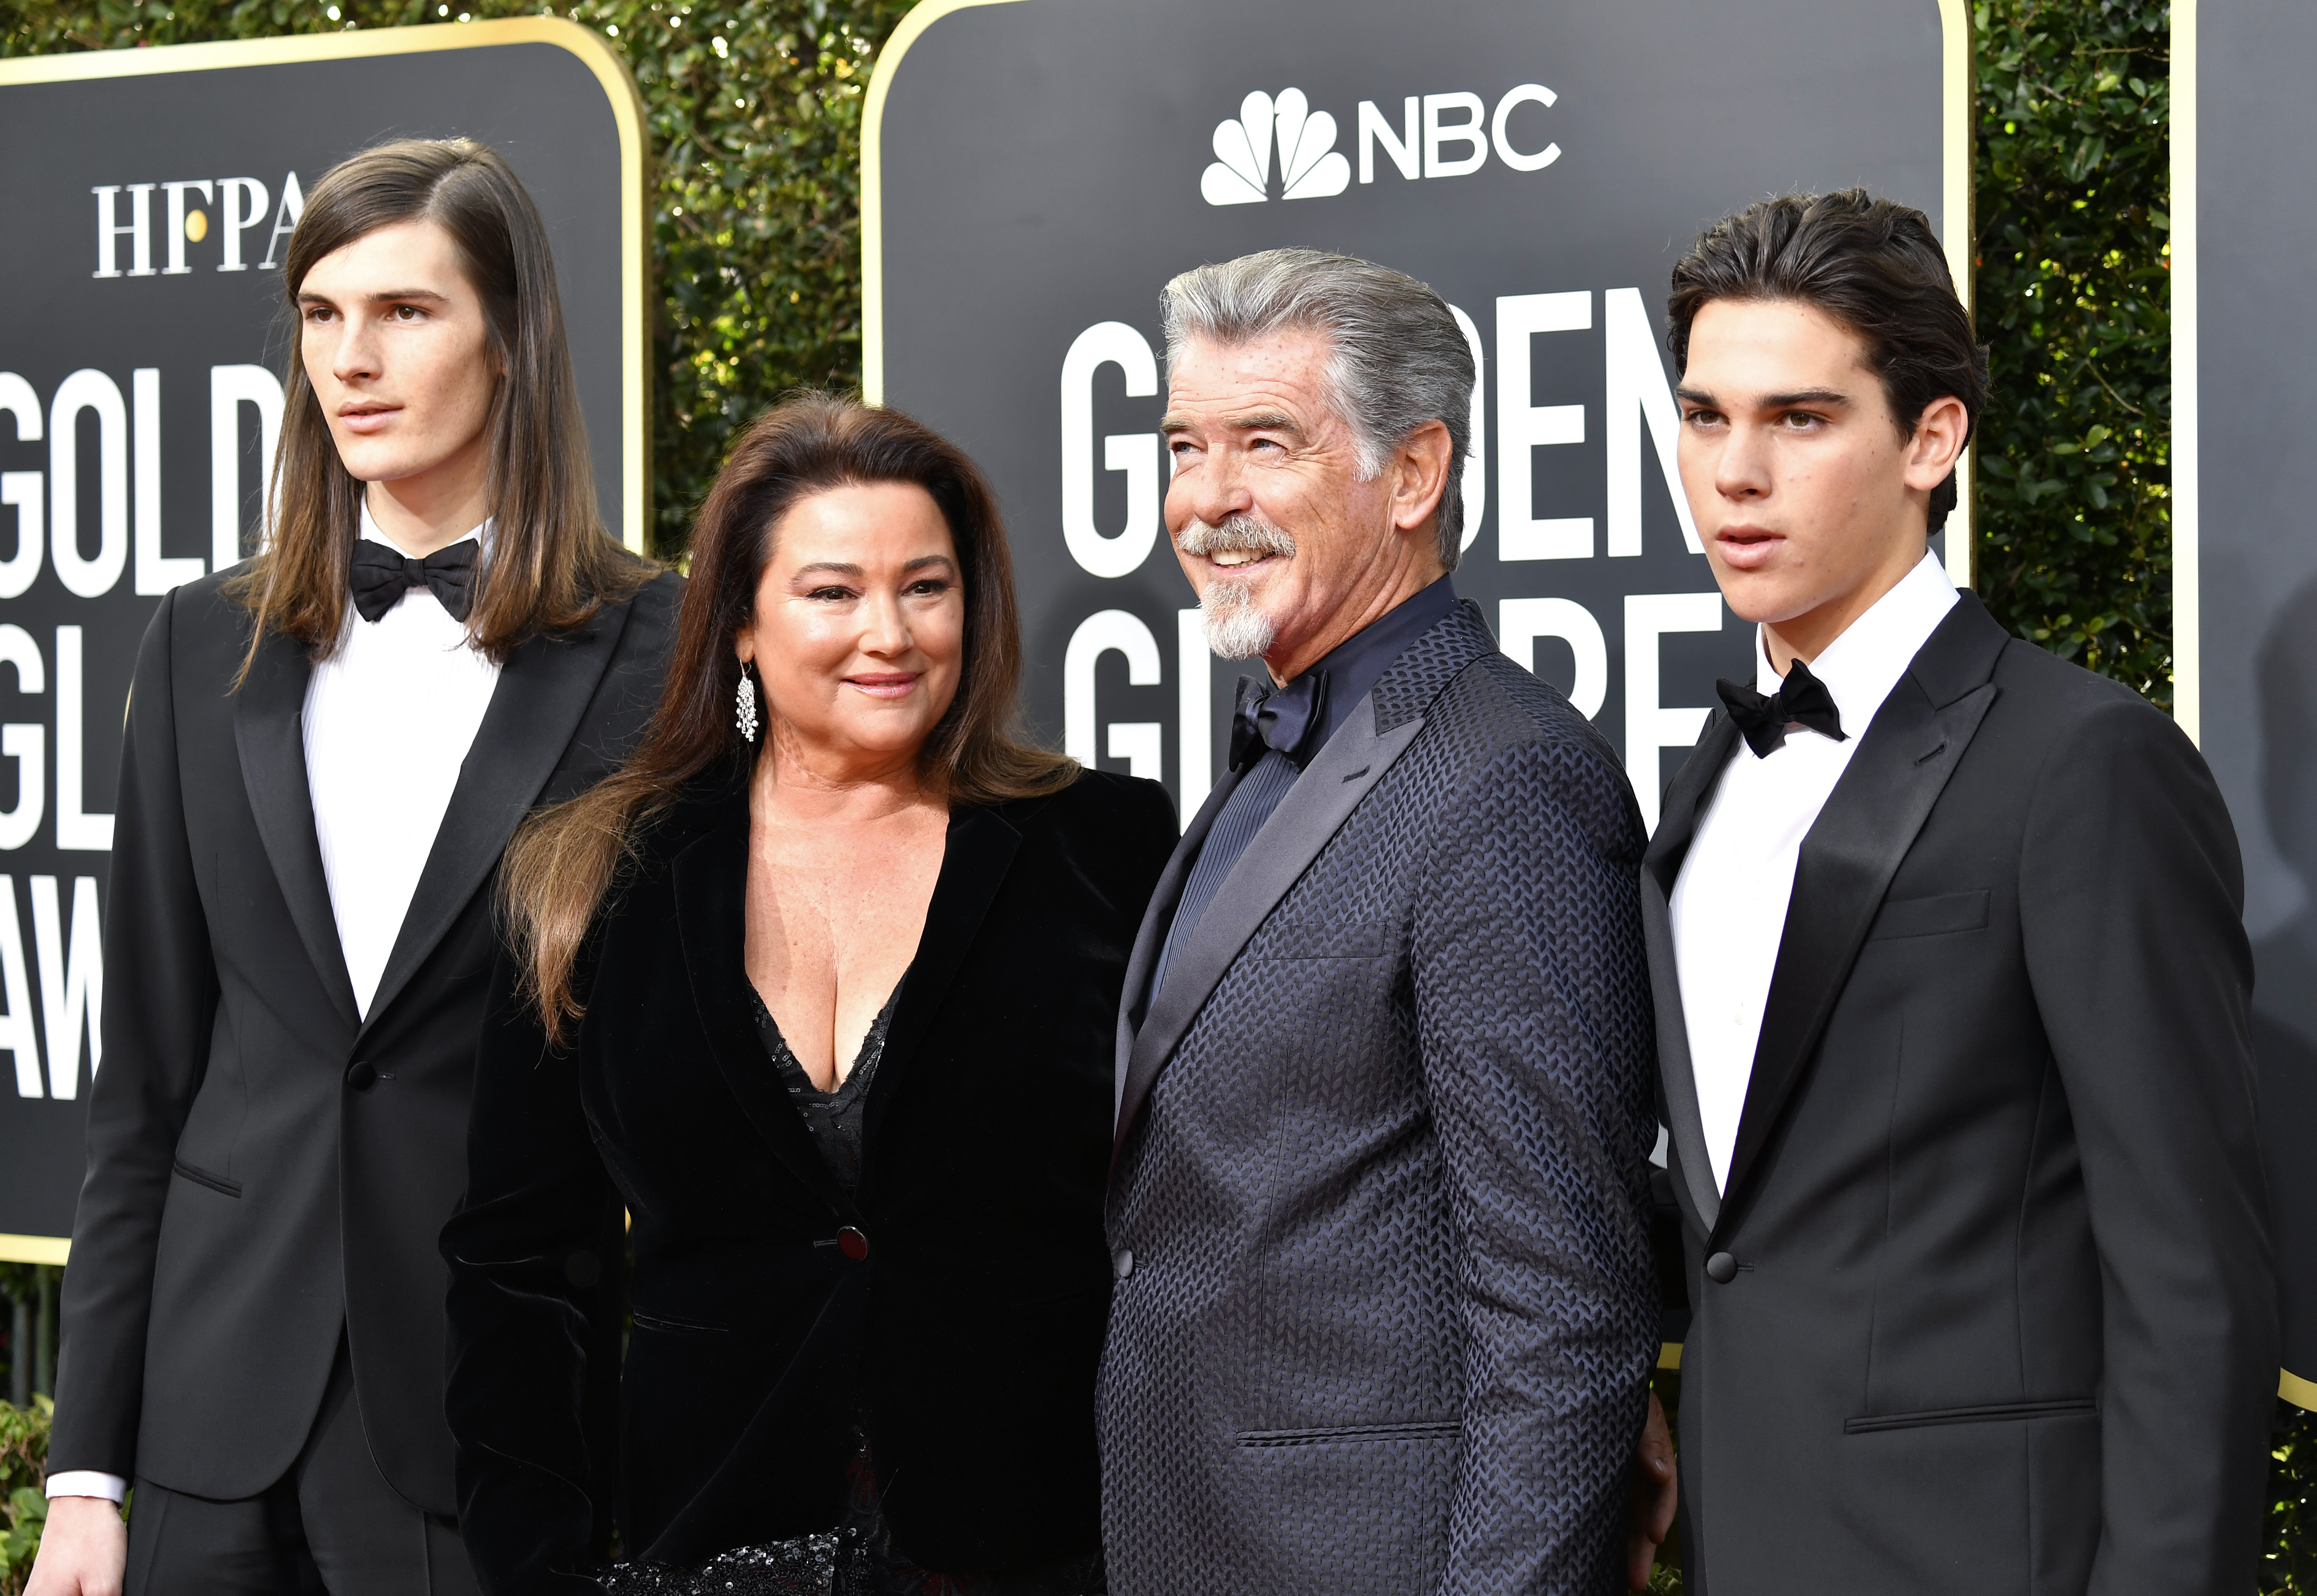 Dylan Brosnan, Keely Shaye Brosnan, Pierce Brosnan, and Paris Brosnan attend the 77th Annual Golden Globe Awards at The Beverly Hilton Hotel on January 05, 2020 in Beverly Hills, California. | Source: Getty Images